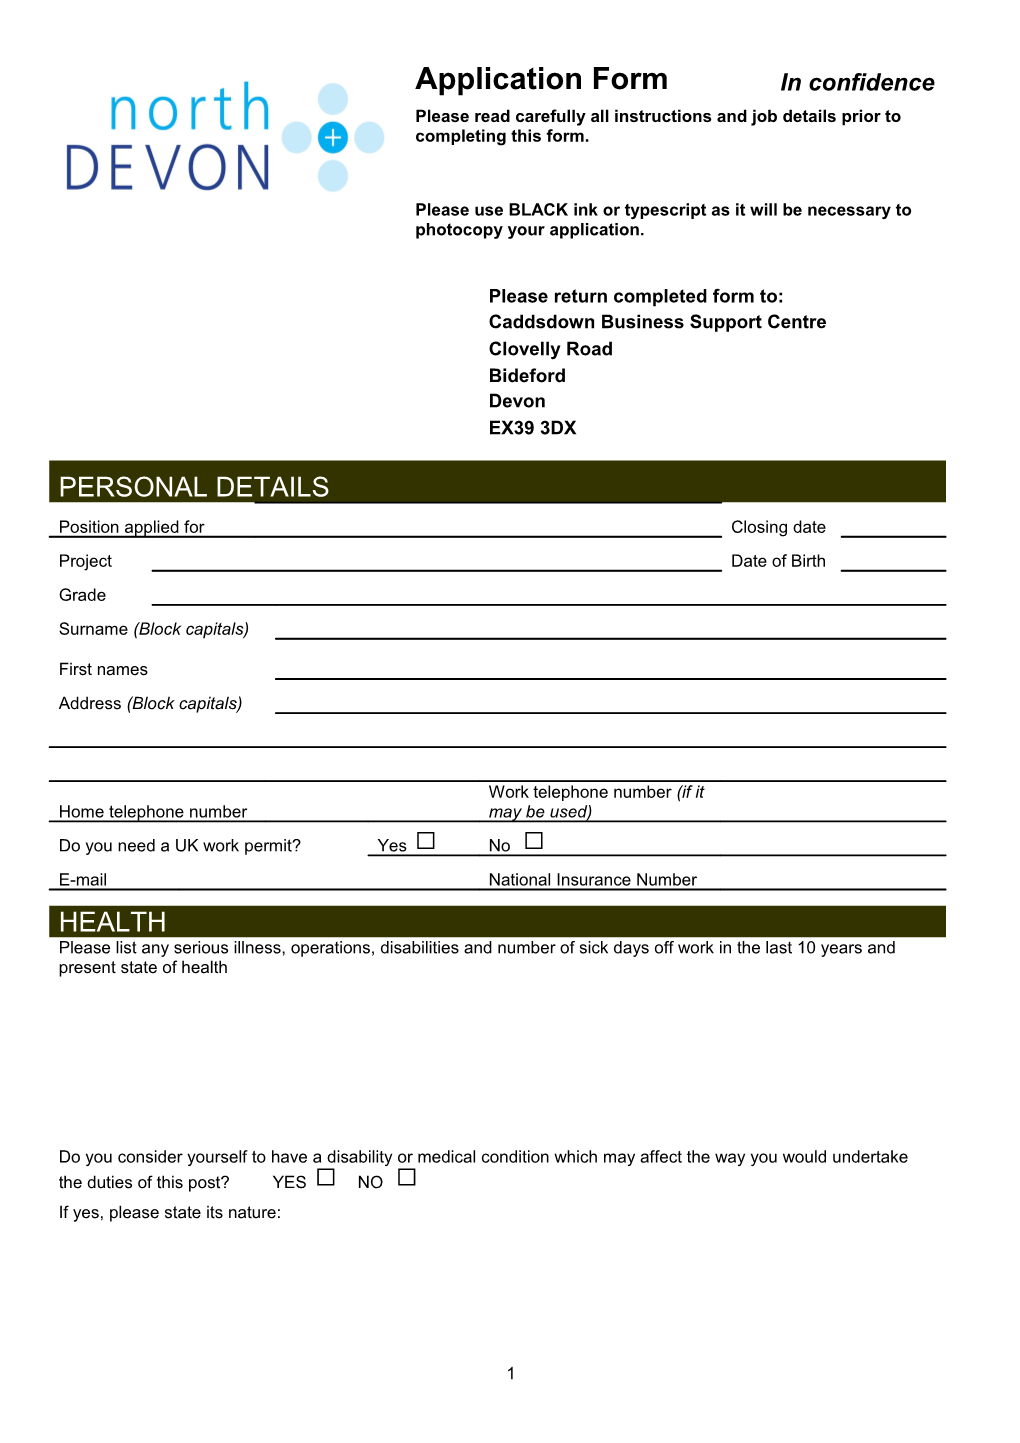 Please Note That This Form Is Always Removed Prior to Shortlisting